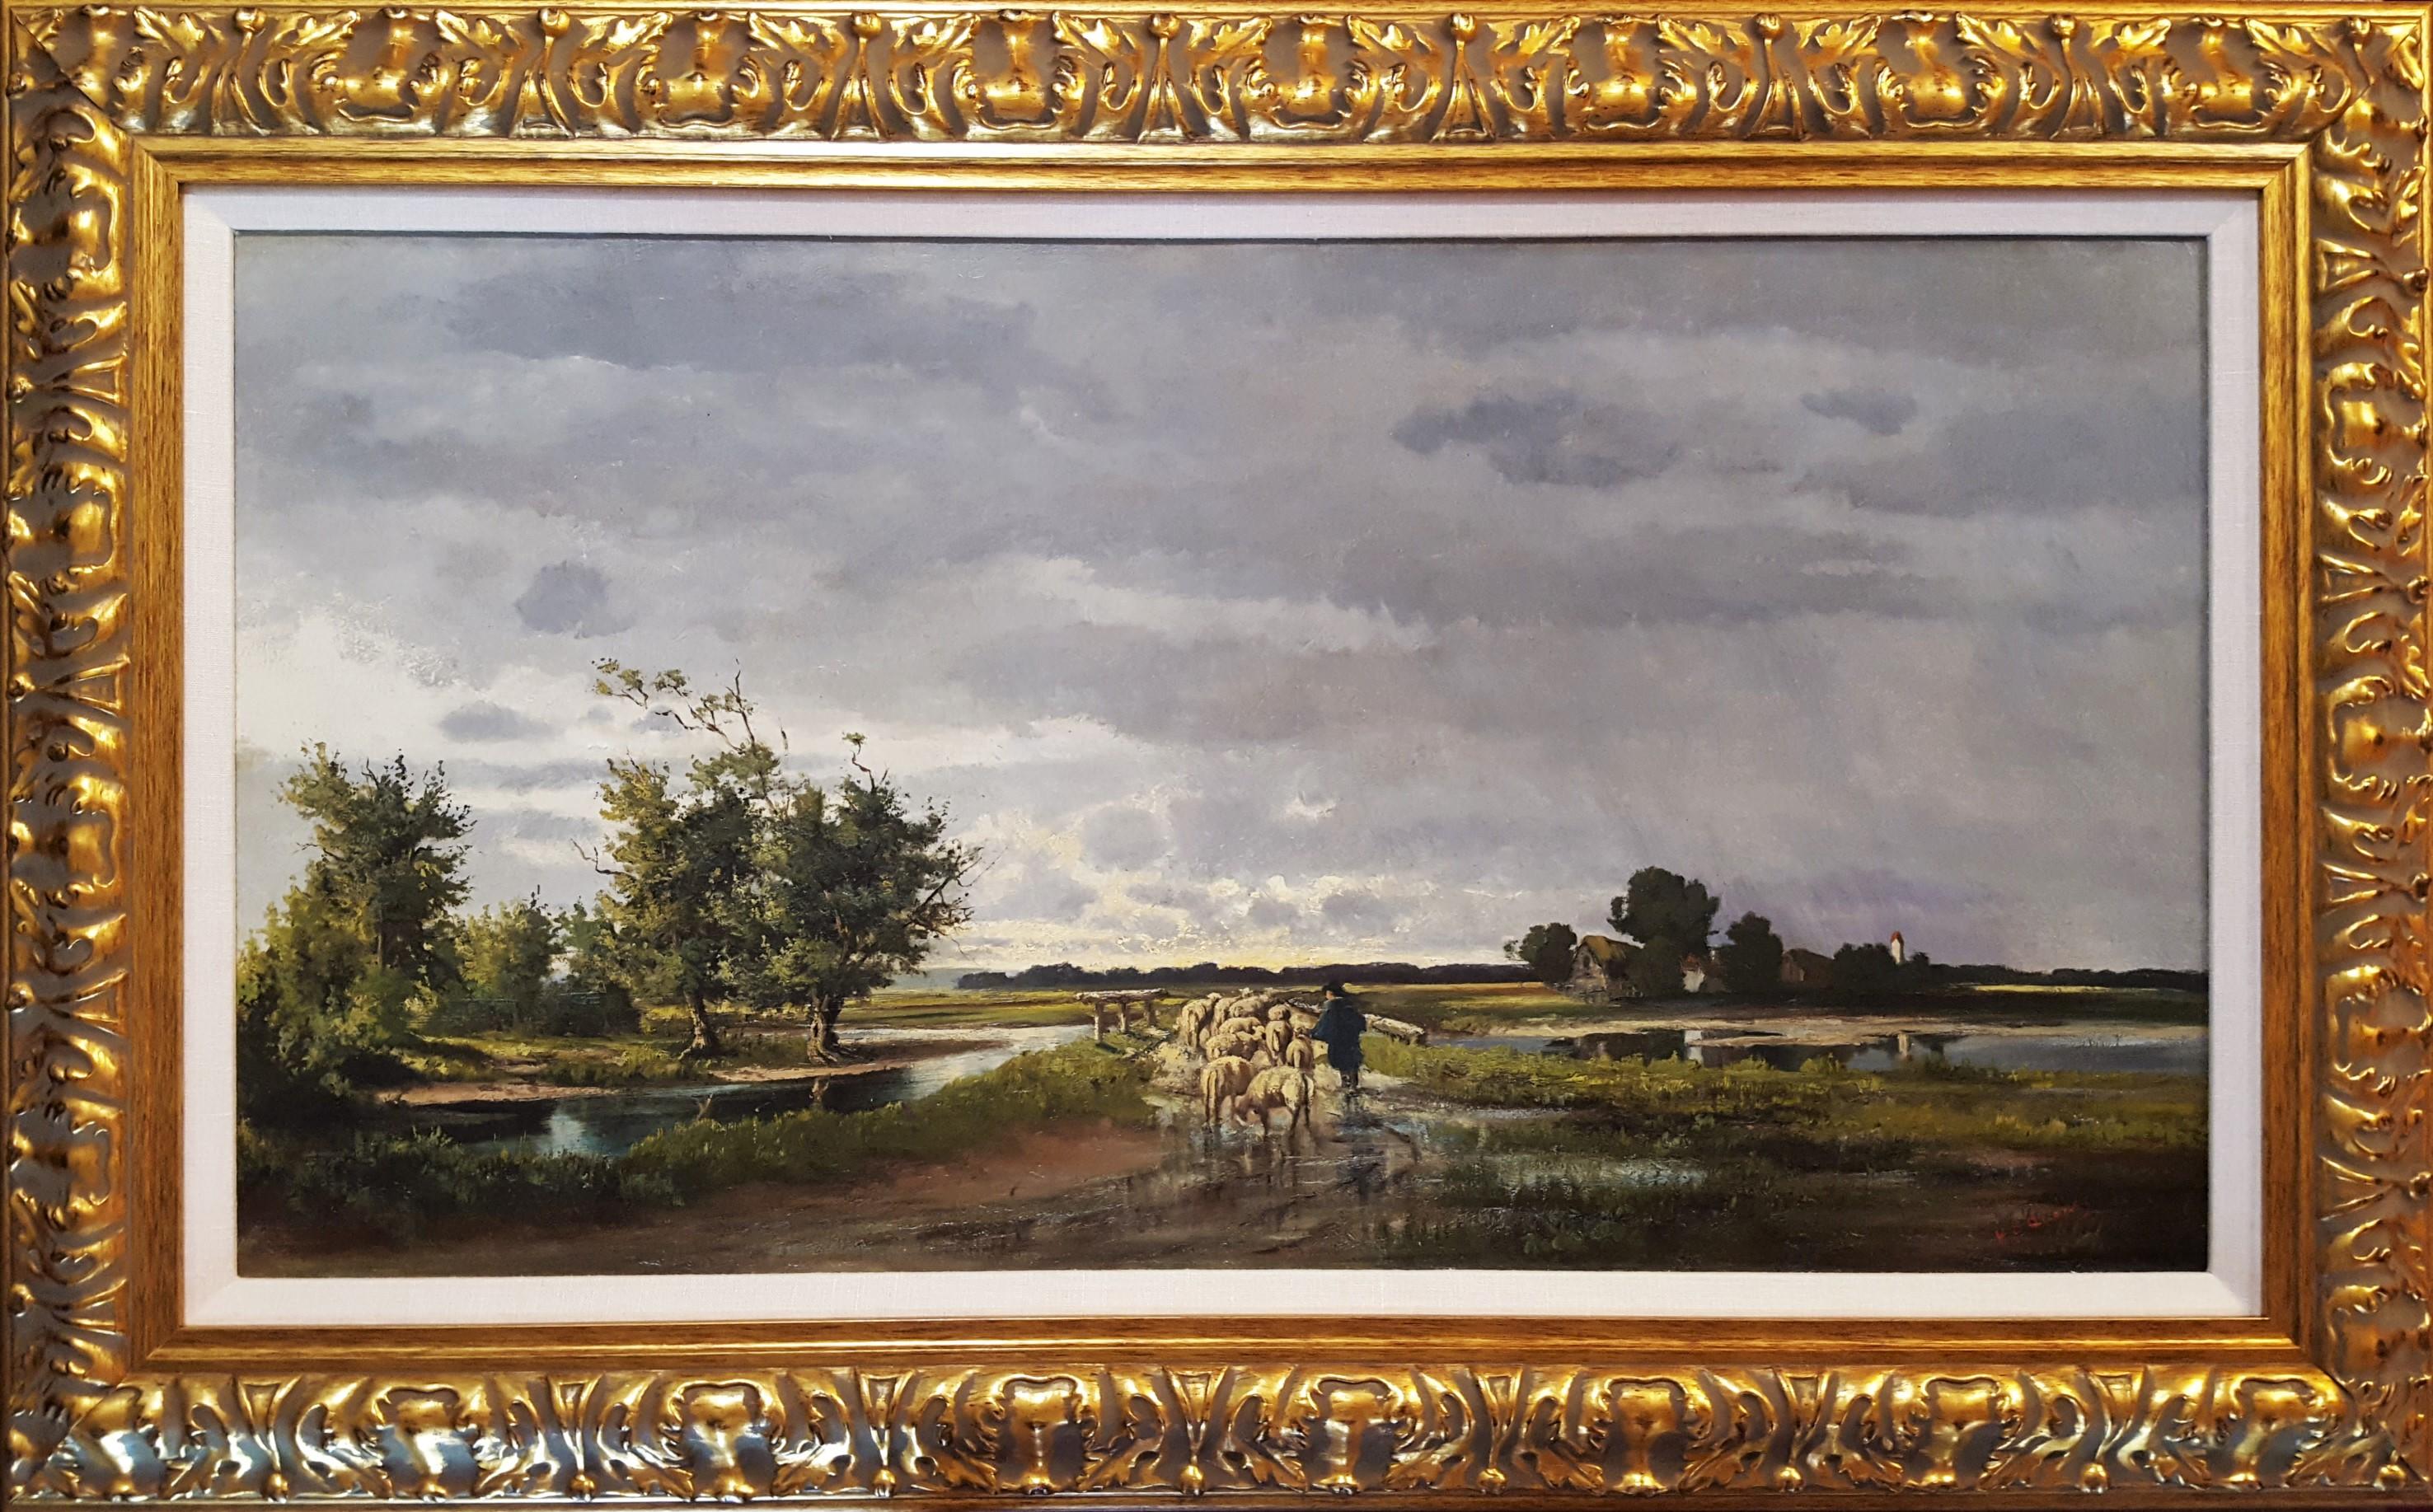 Shepherd with Sheep Pastoral Landscape - Painting by Henrietta S. Quincy 